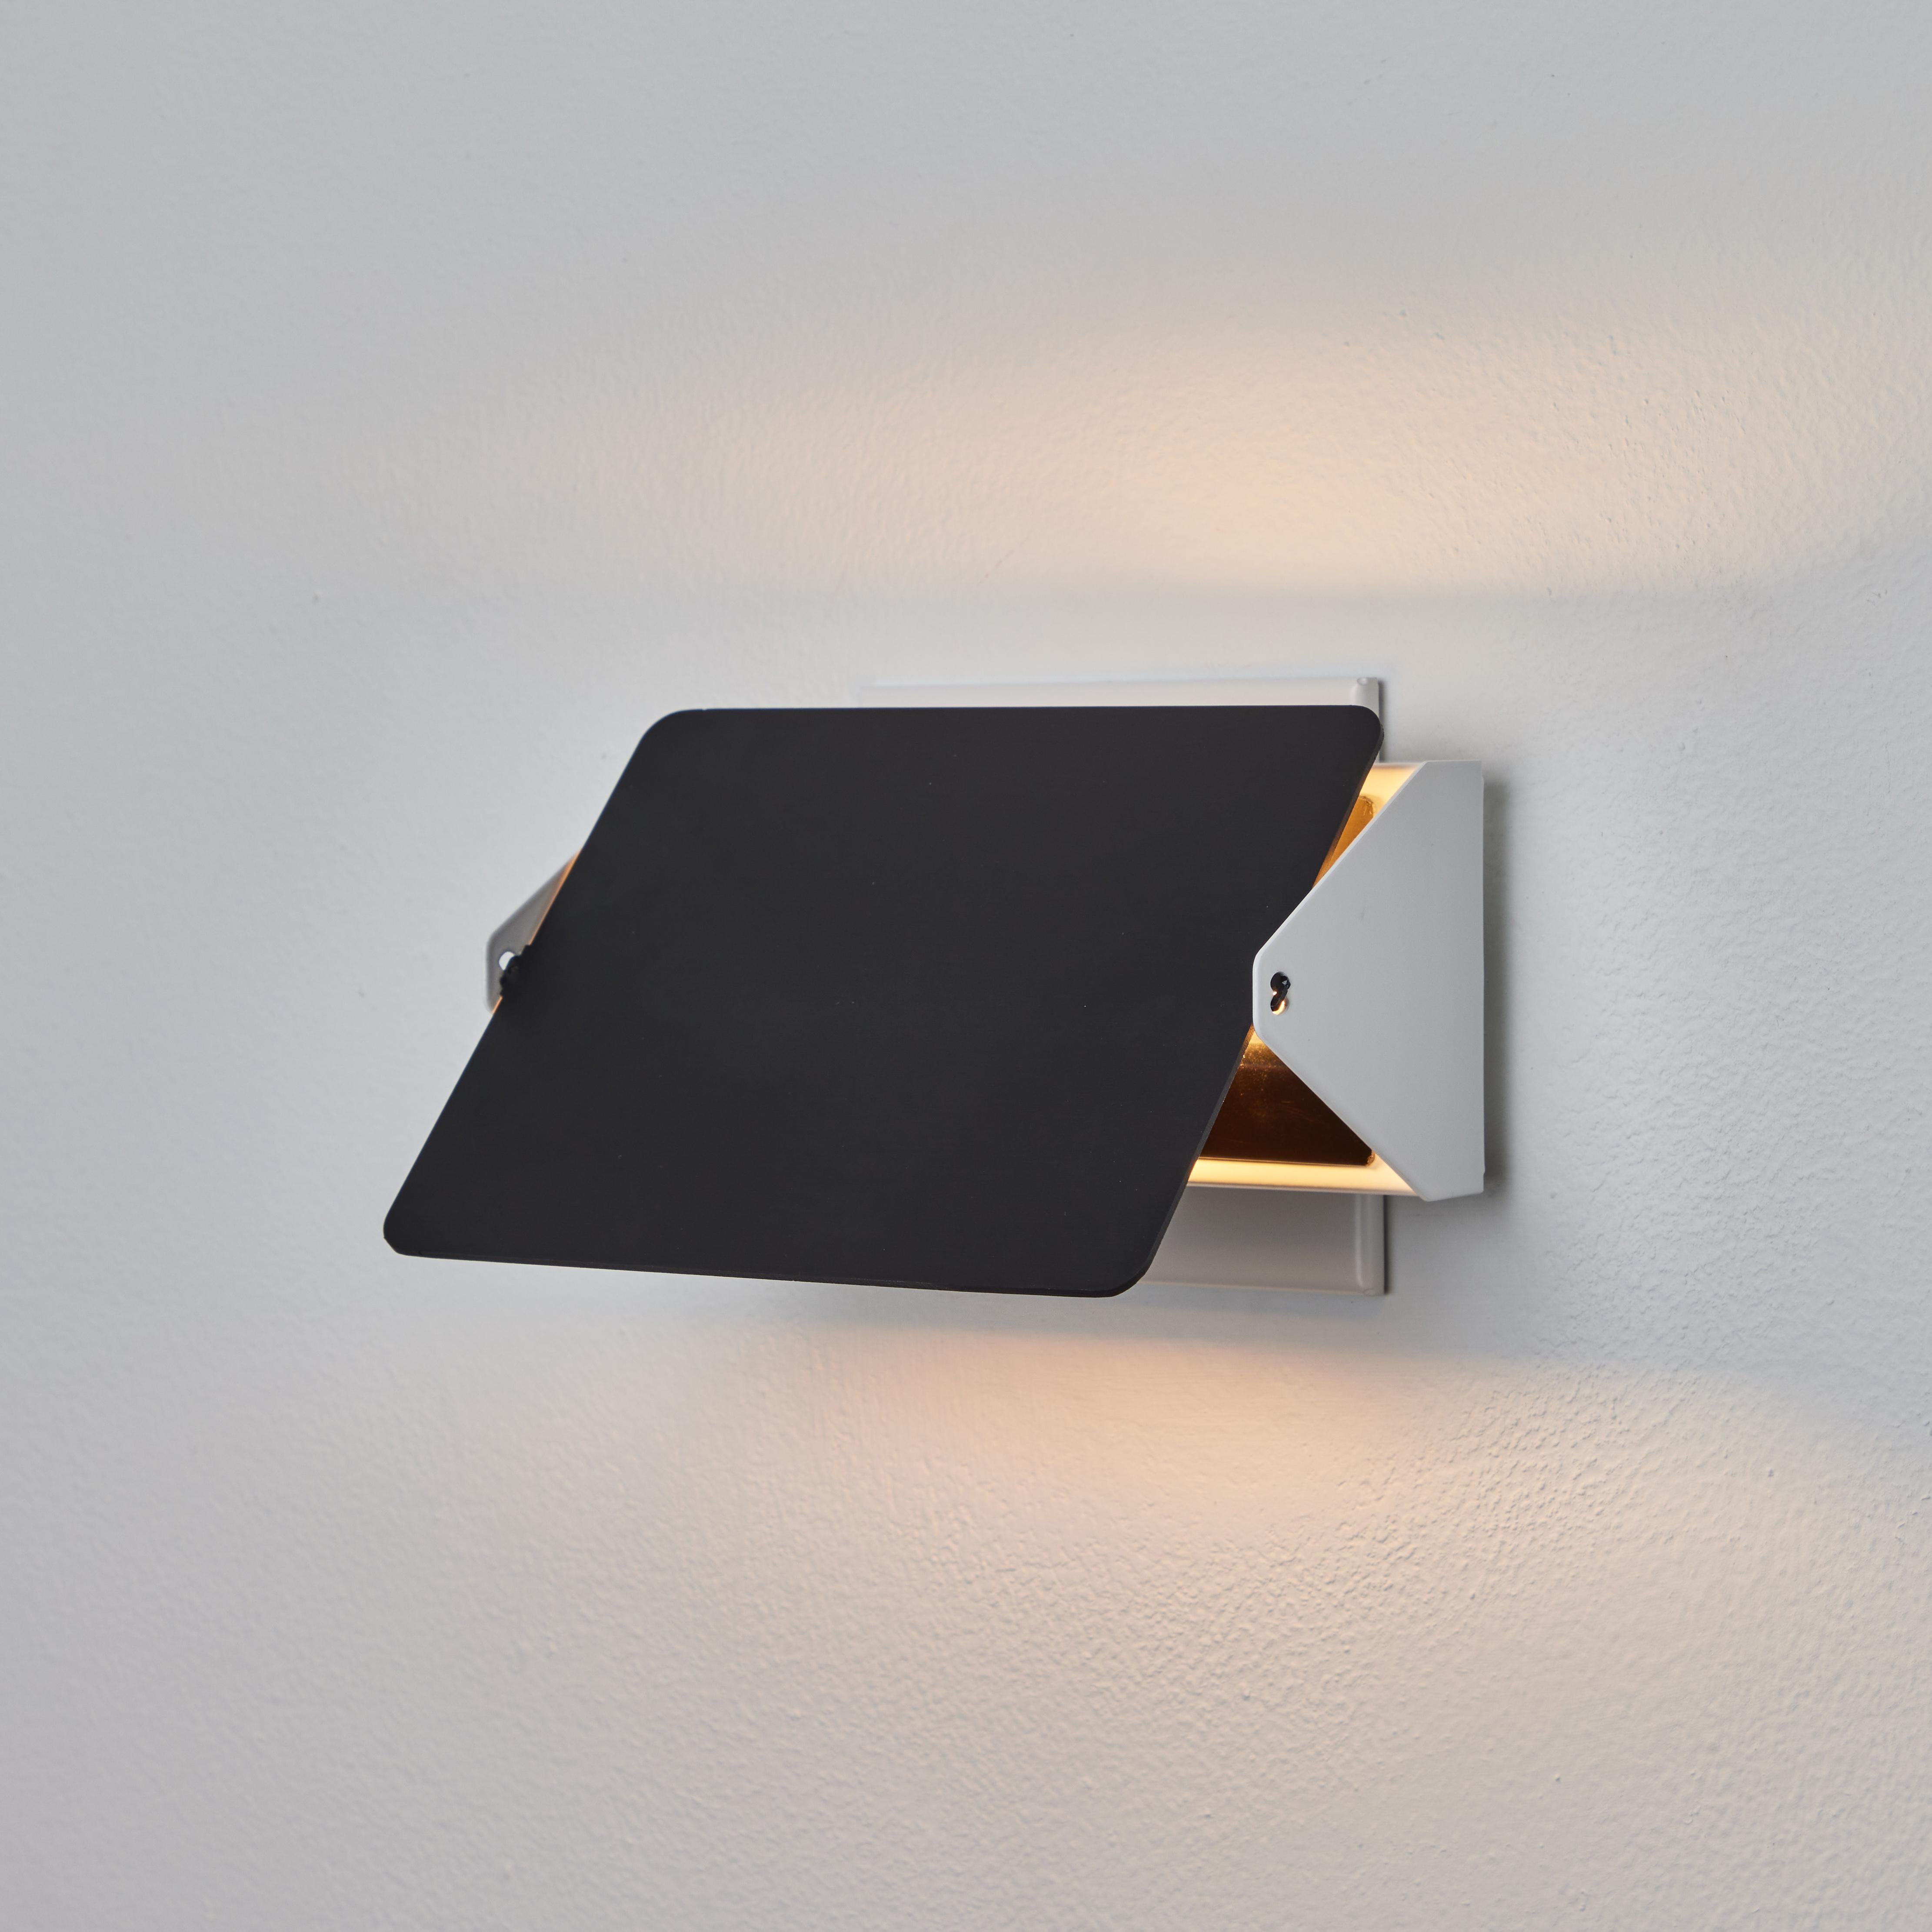 Painted Charlotte Perriand 'Applique À Volet Pivotant' Wall Light in Black for Nemo For Sale